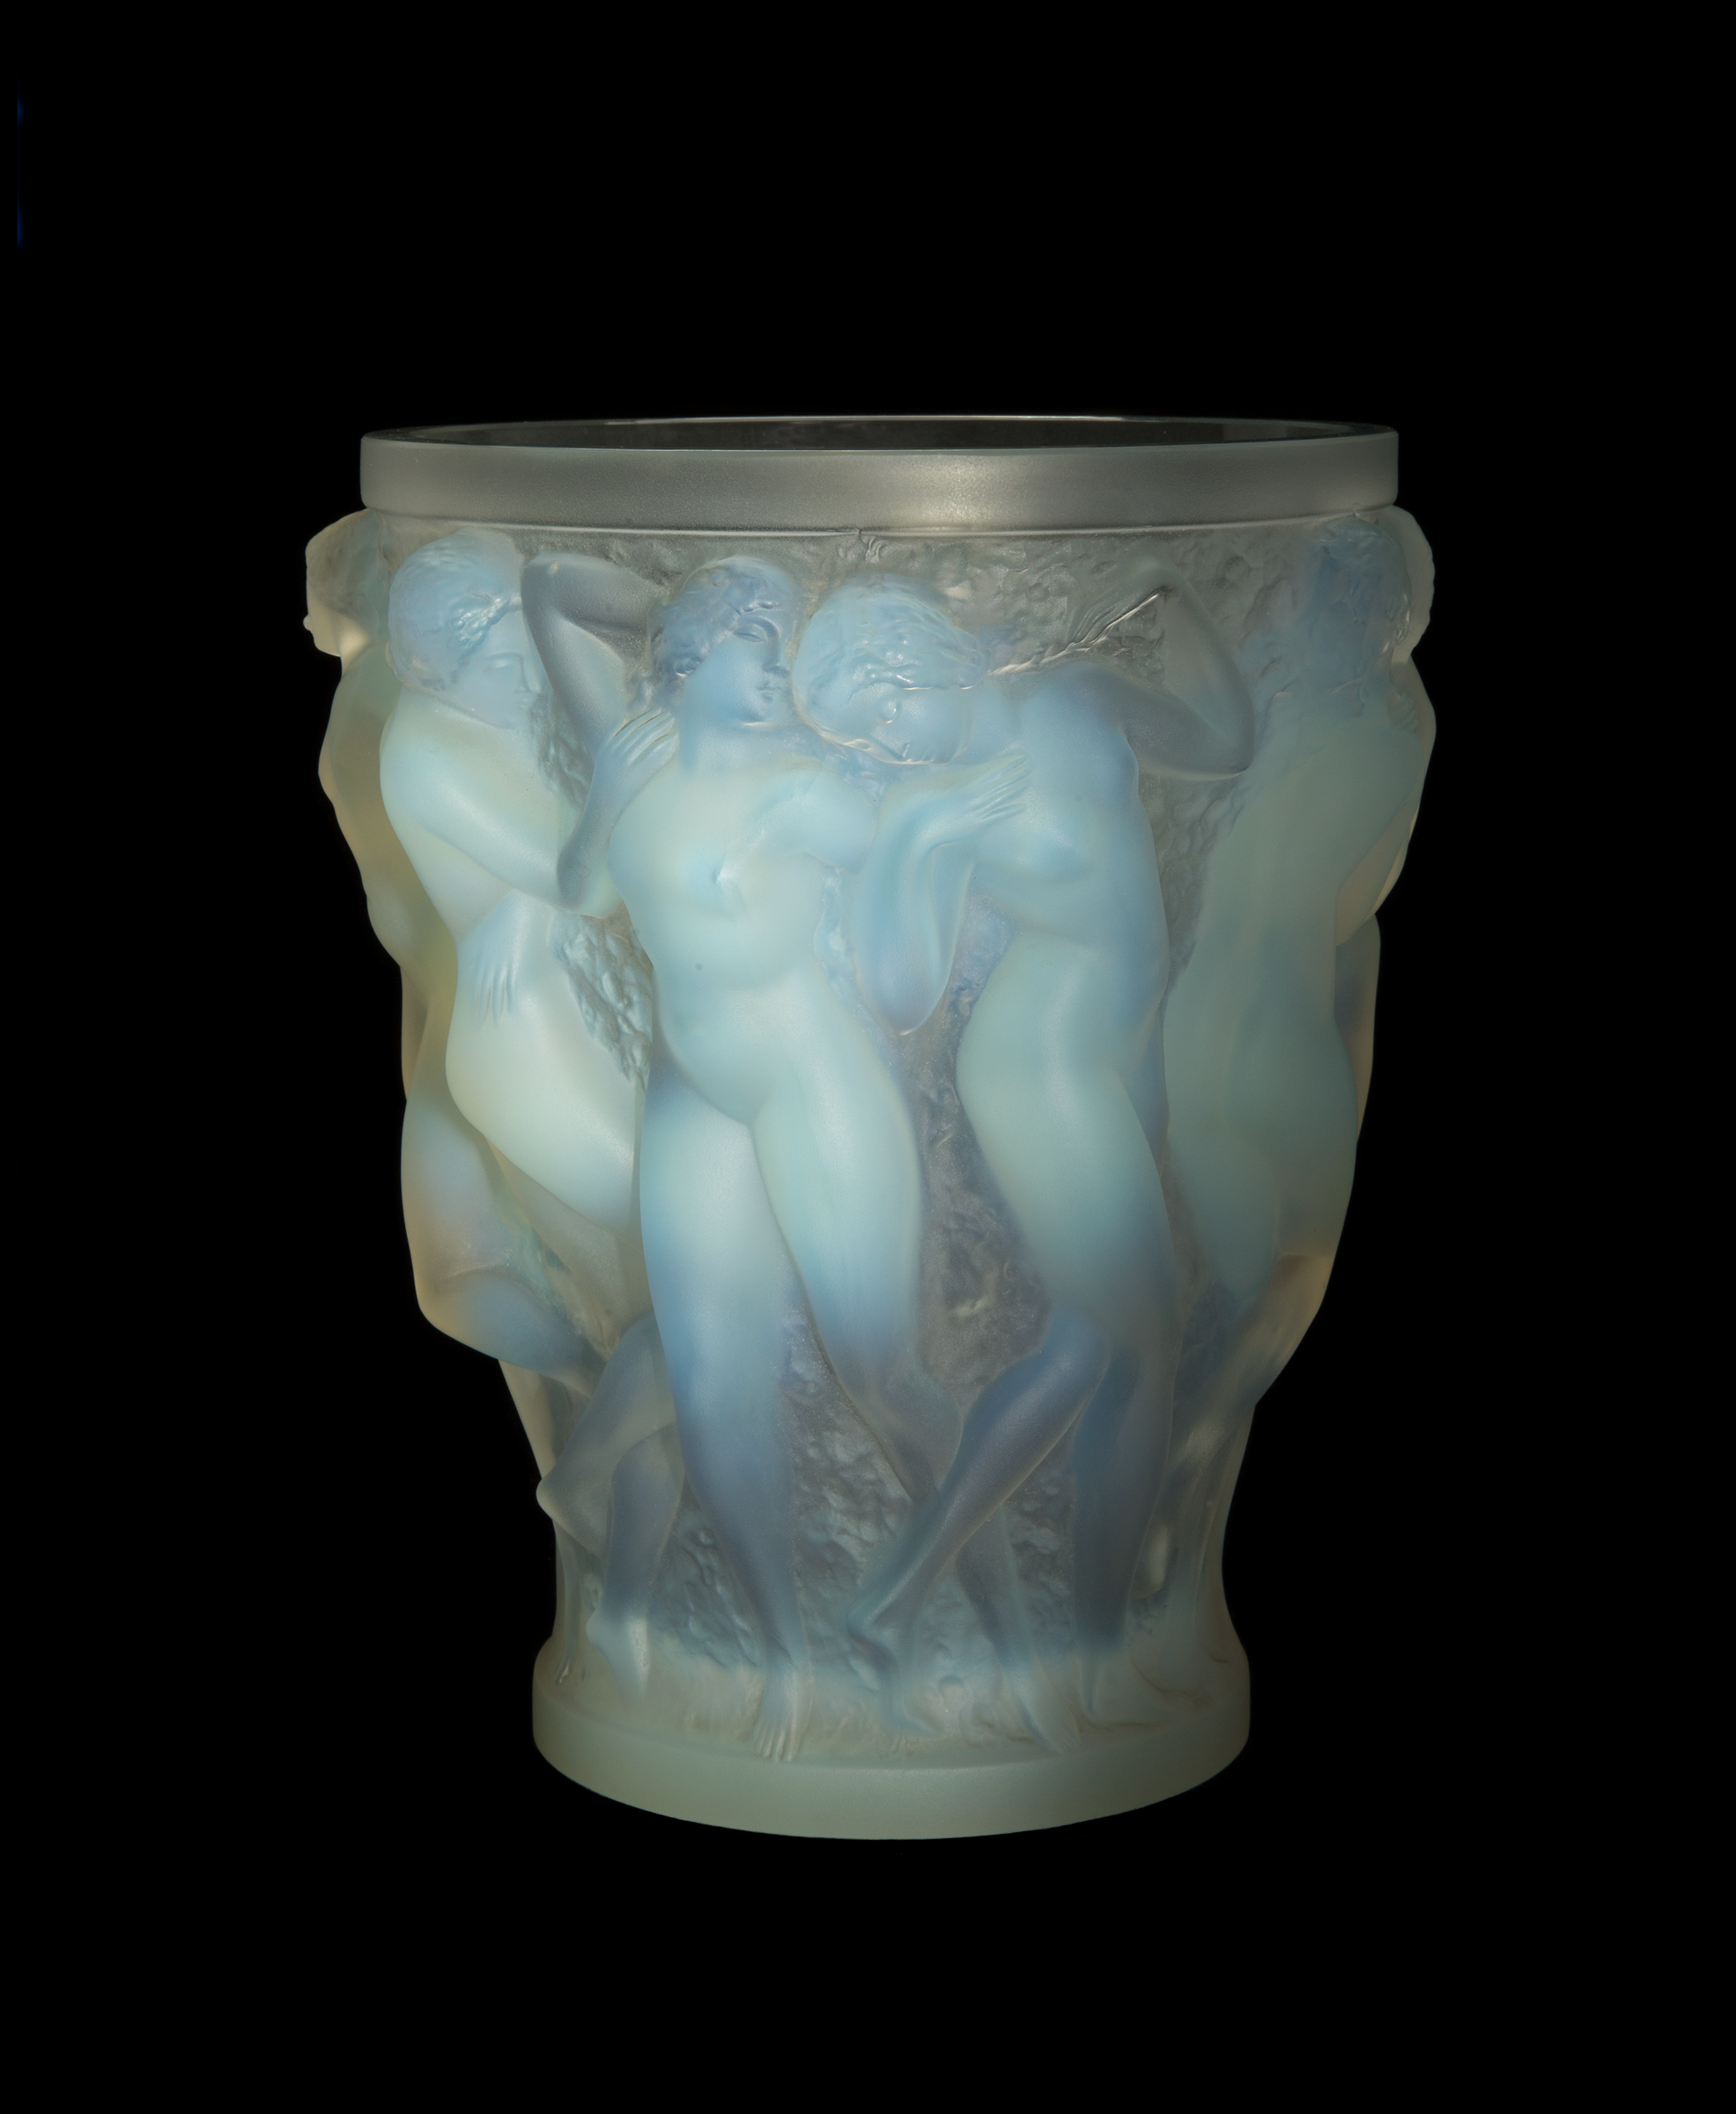  René Lalique (French, 1860–1945).  Vase Bacchantes (Bacchantes Vase).  Press-molded opal glass; 9 1/2 x 8 3/4 in. Collection of David Huchthausen. Photo by Llyod Shugart. 